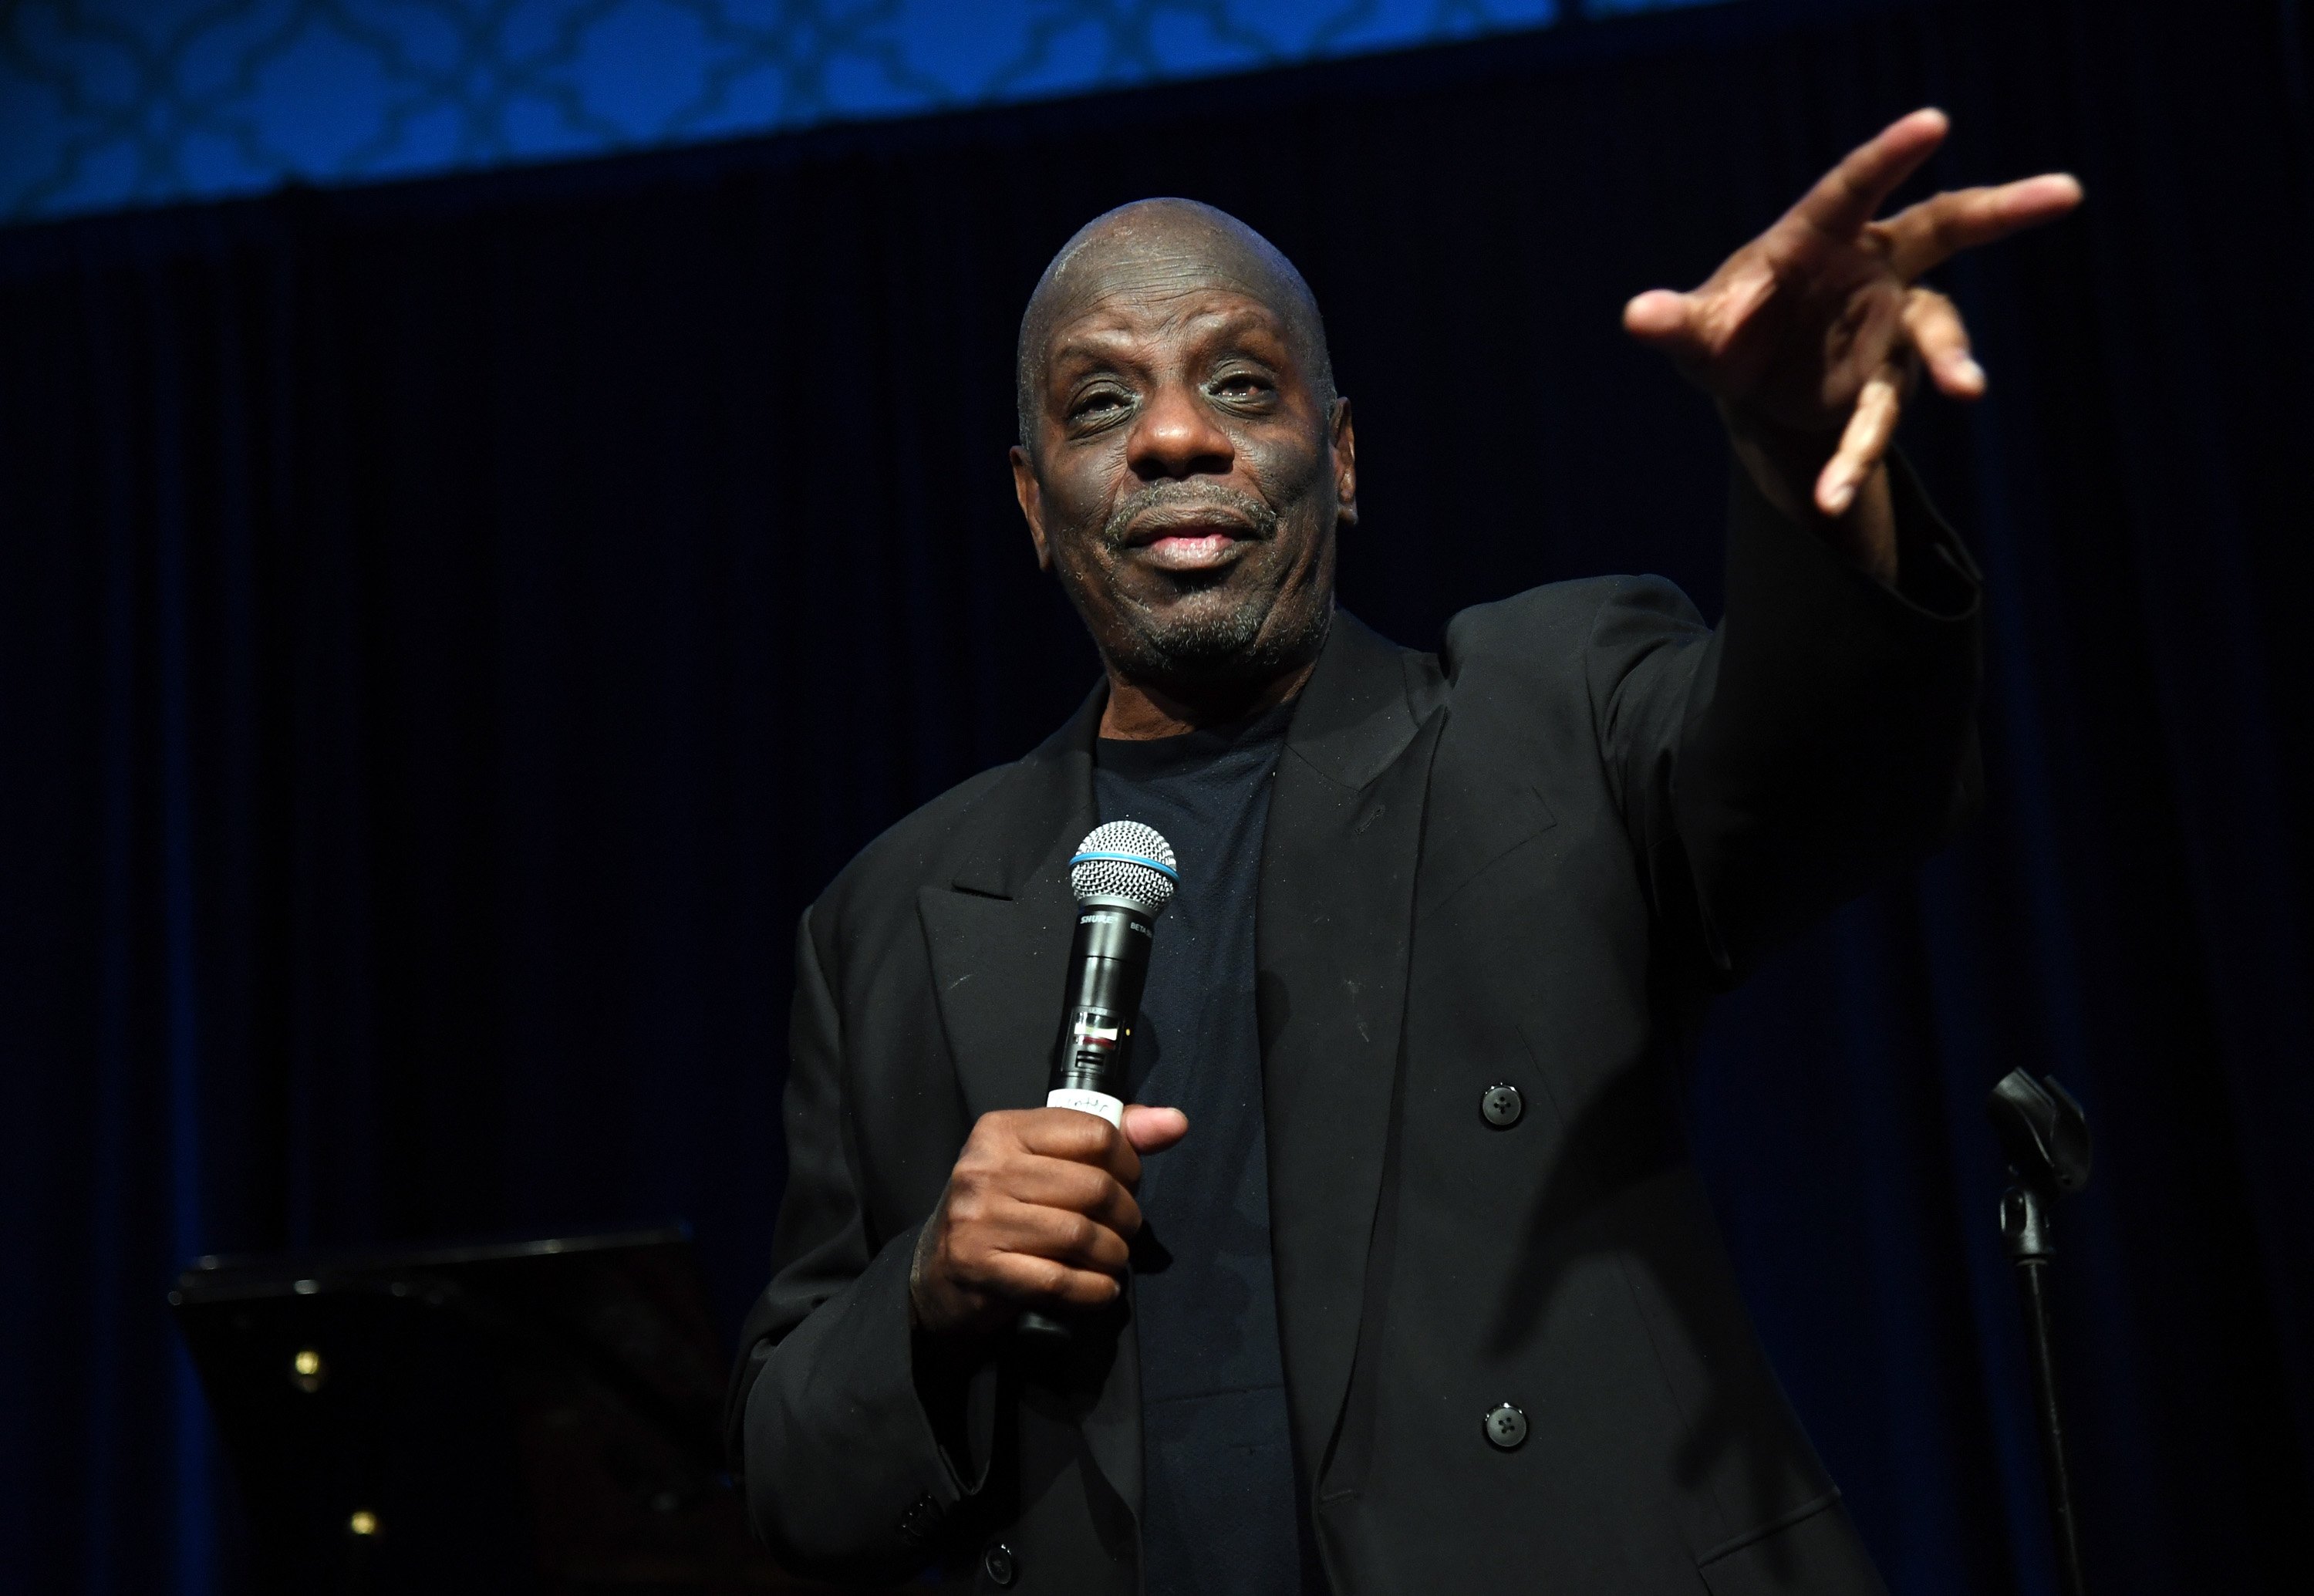 Jimmie Walker at the Rampart Casino at The Resort at Summerlin, on March 23, 2018, in Las Vegas, Nevada. | Source: Getty Images